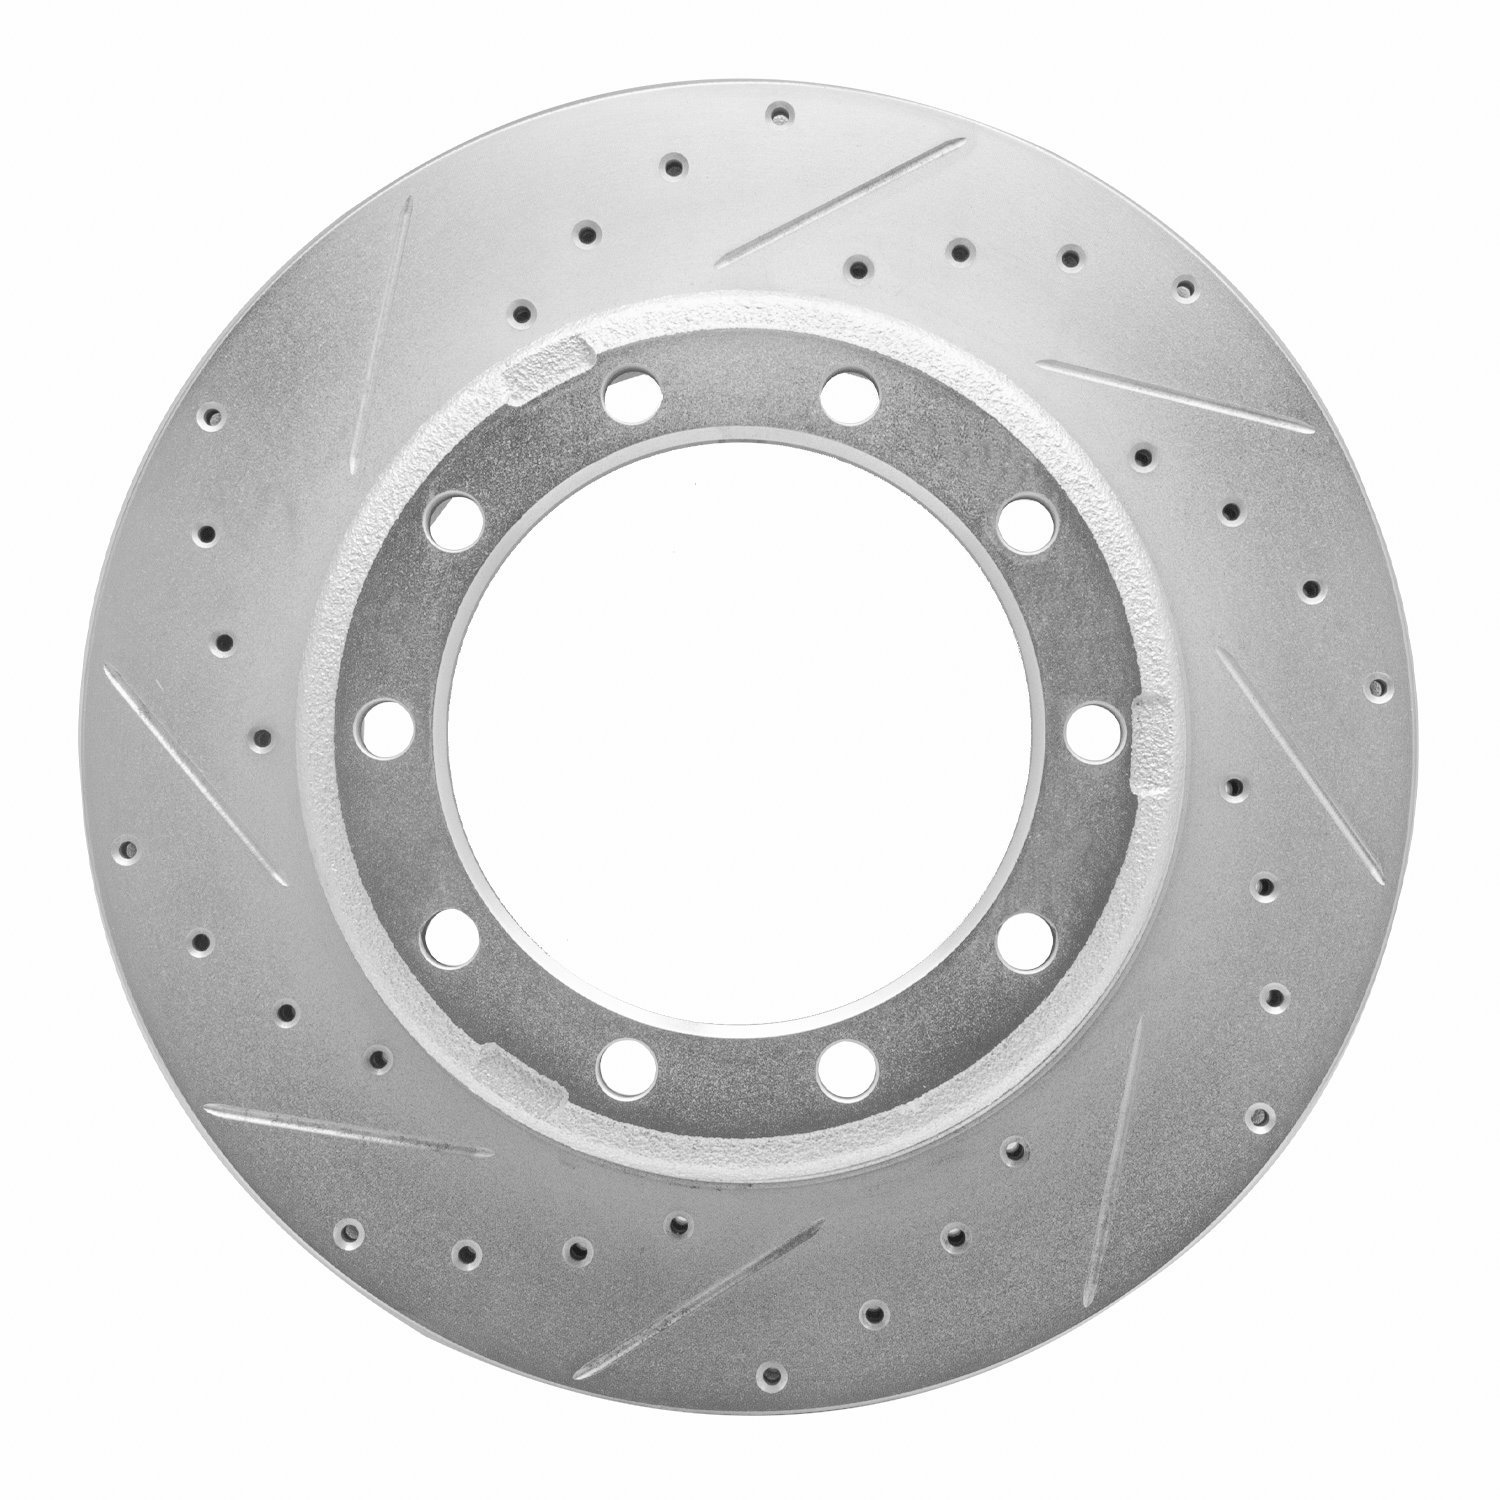 E-Line Drilled & Slotted Silver Brake Rotor, Fits Select Fits Multiple Makes/Models, Position: Front & Rear Right